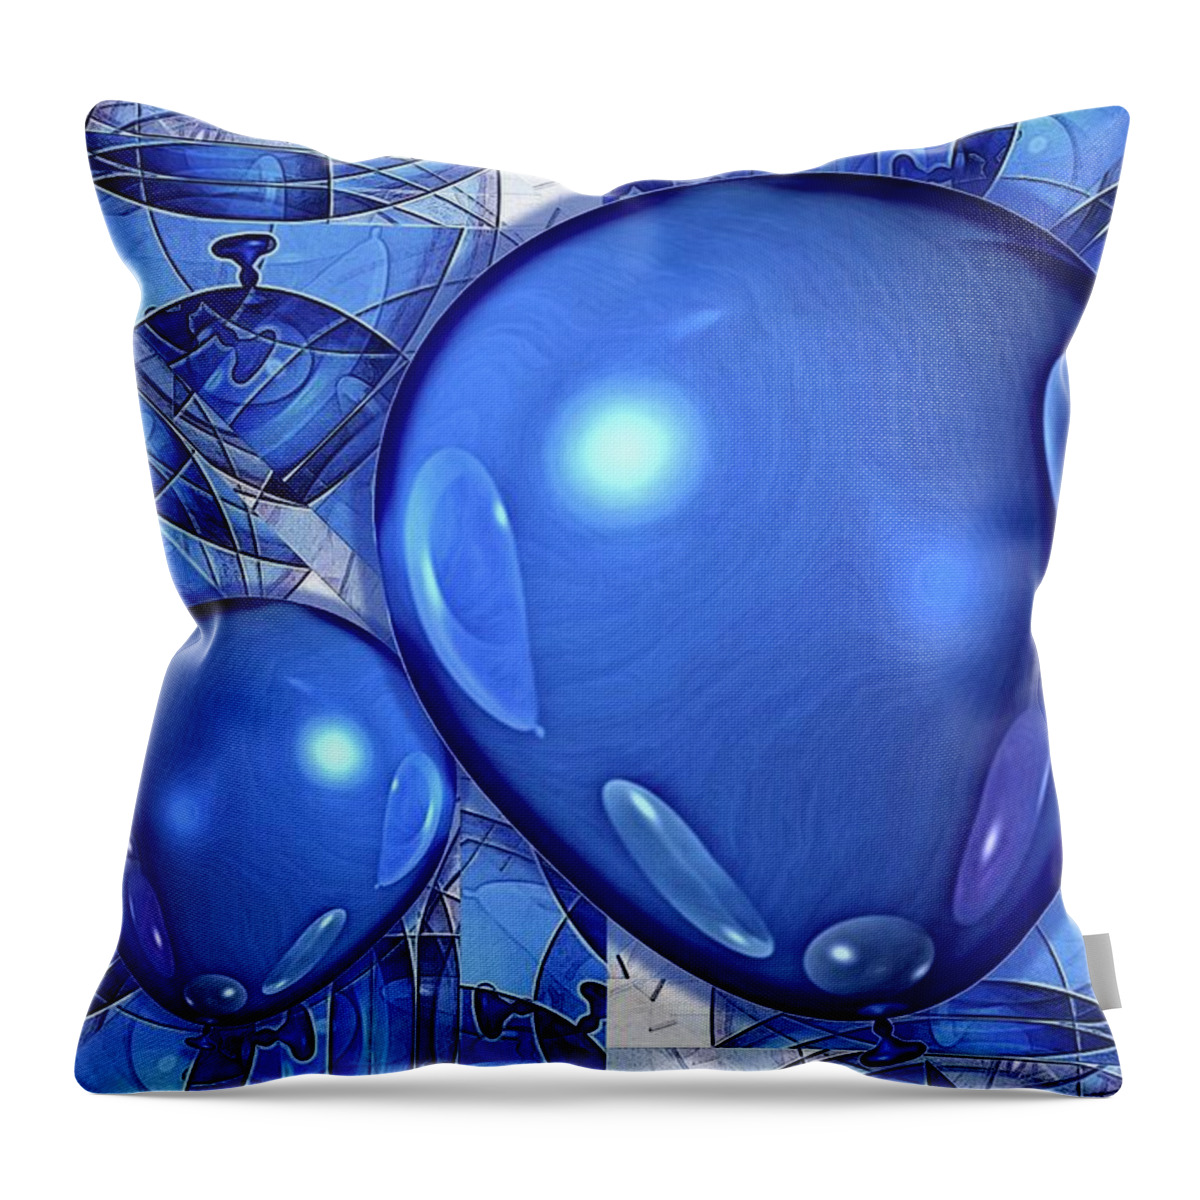 Distortion Throw Pillow featuring the digital art Balloons by Ron Bissett